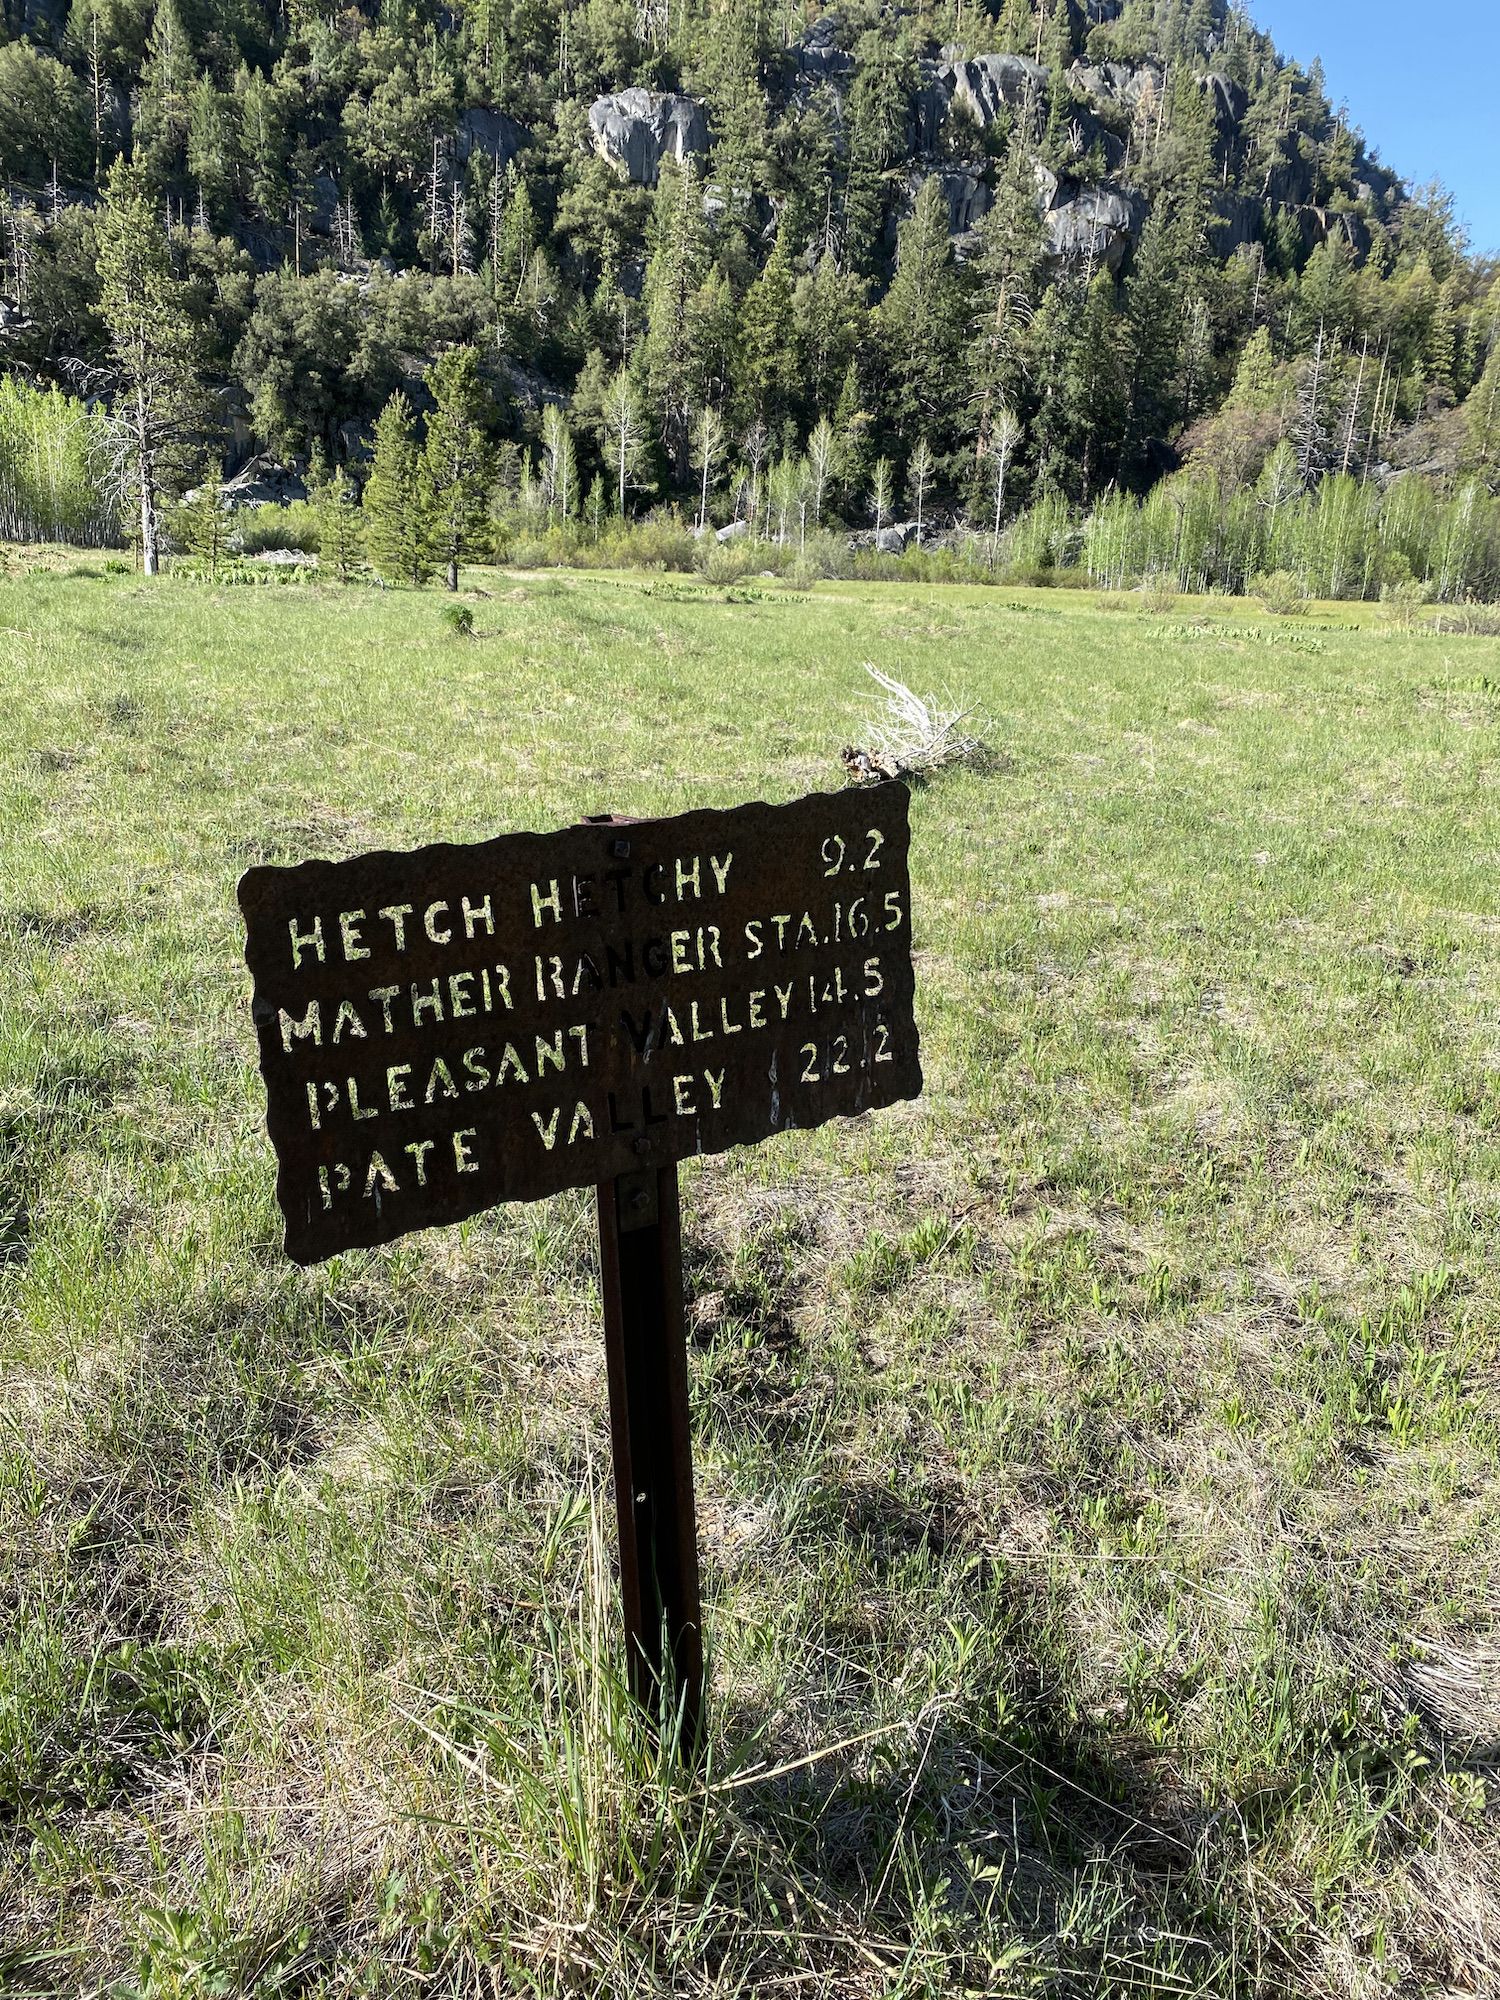 A sign saying 9.2 miles to Hetch Hetchy